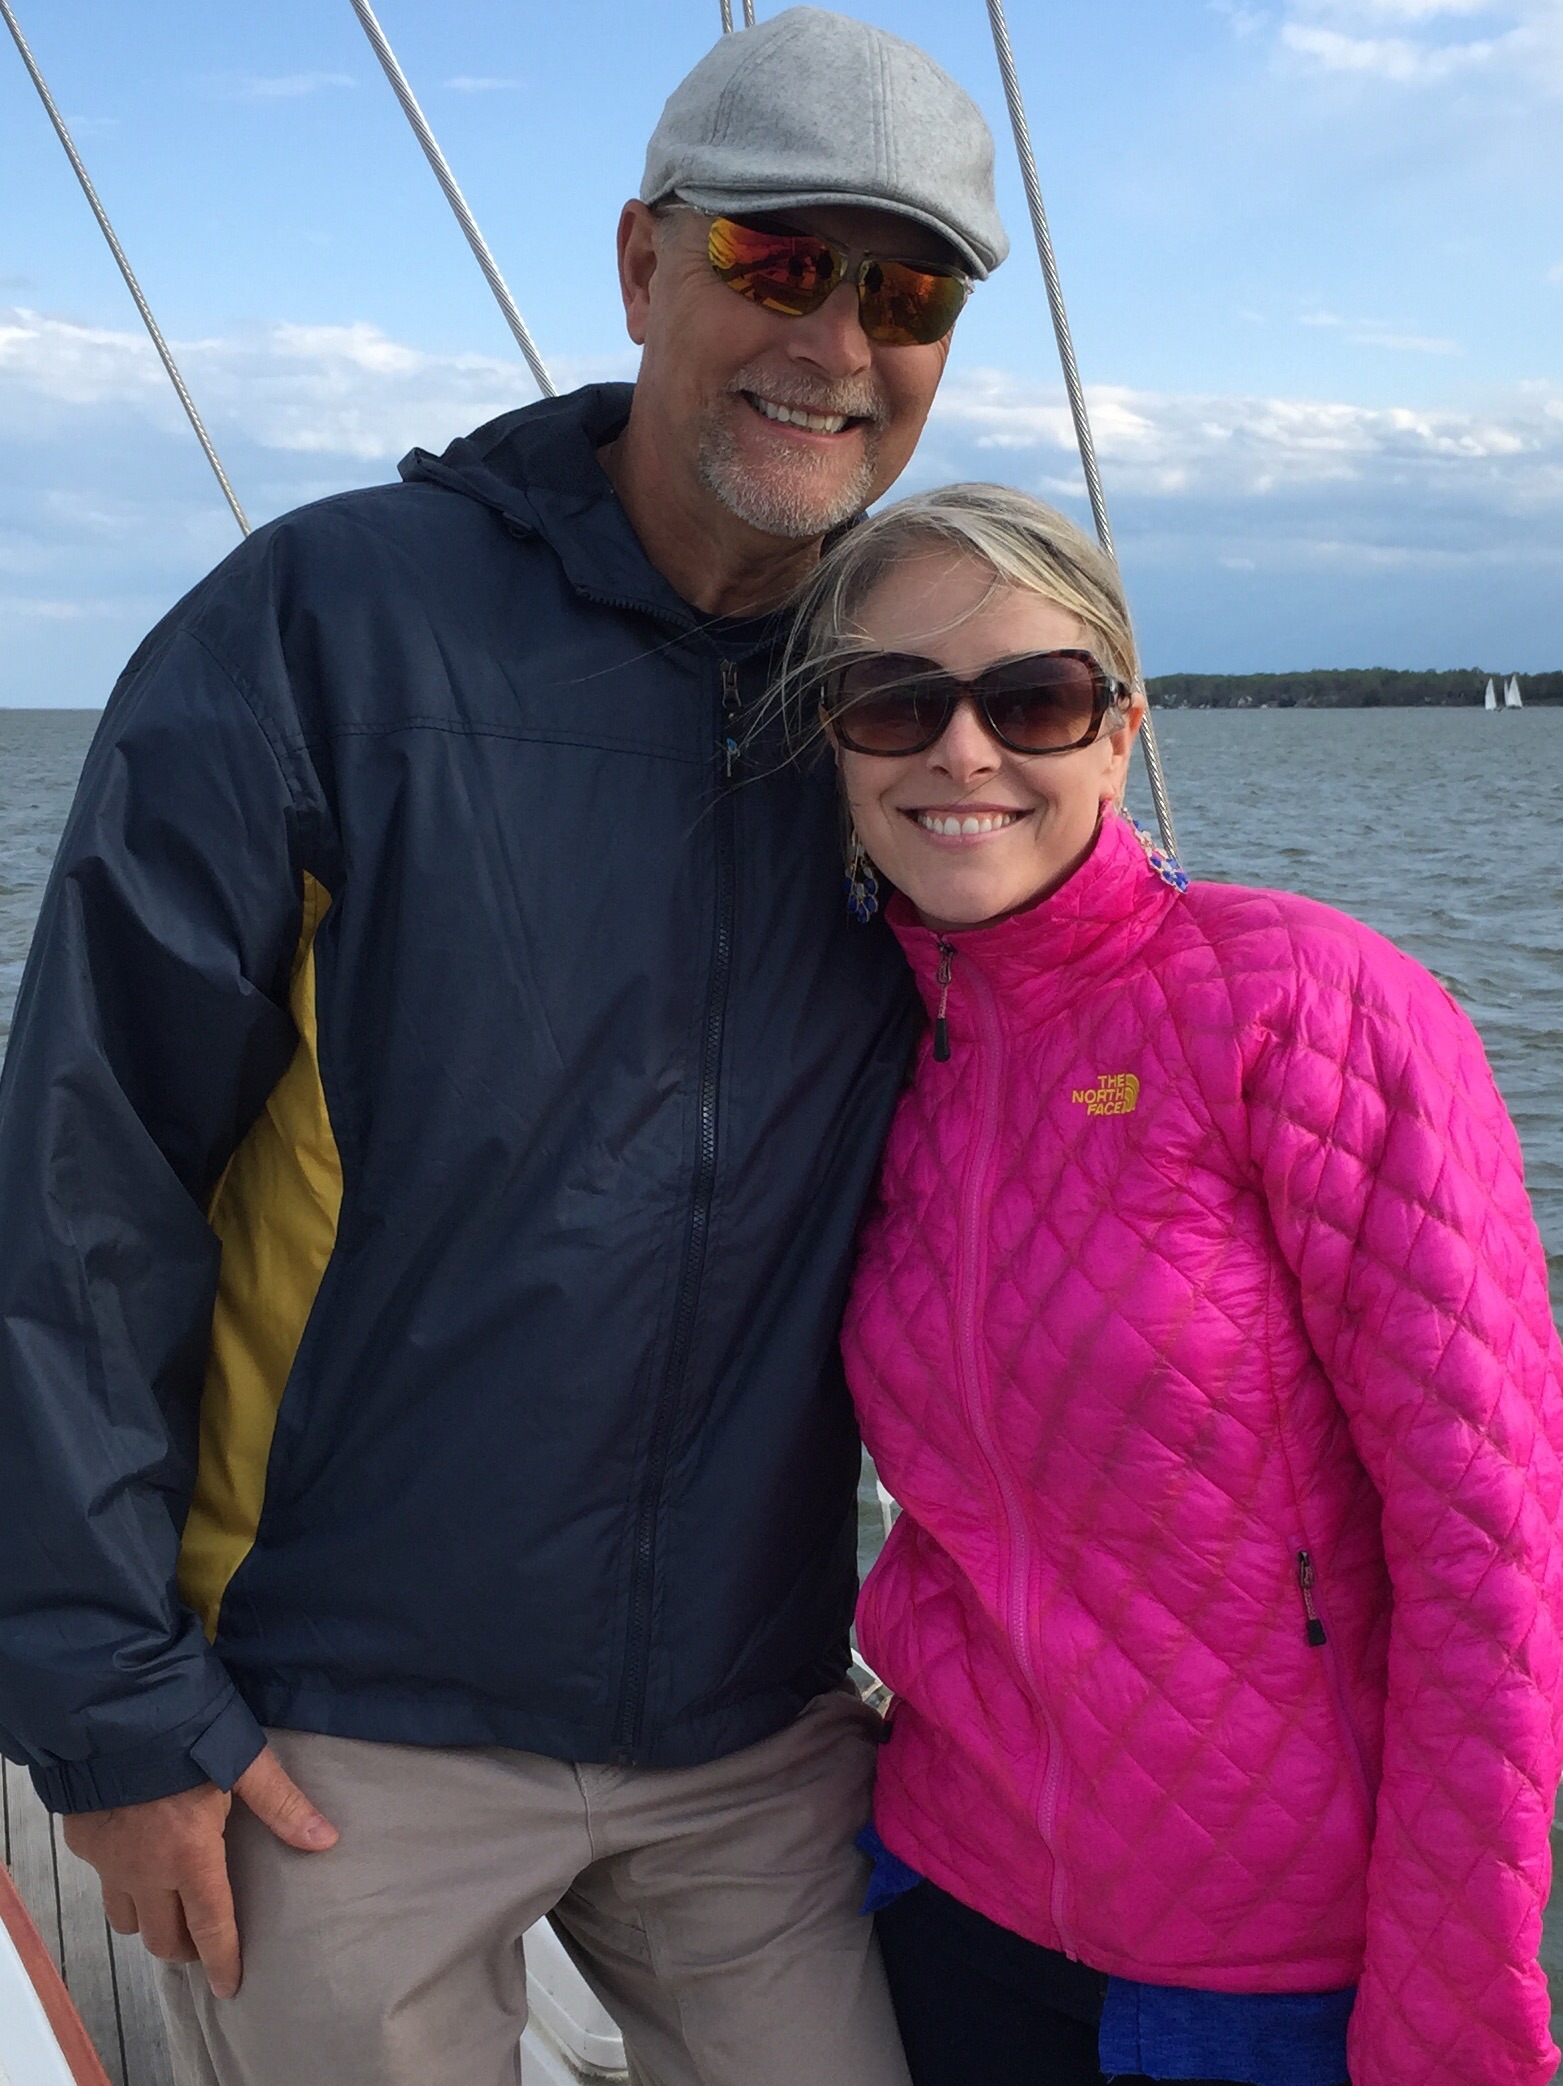 Two very happy people sailing on the schooner